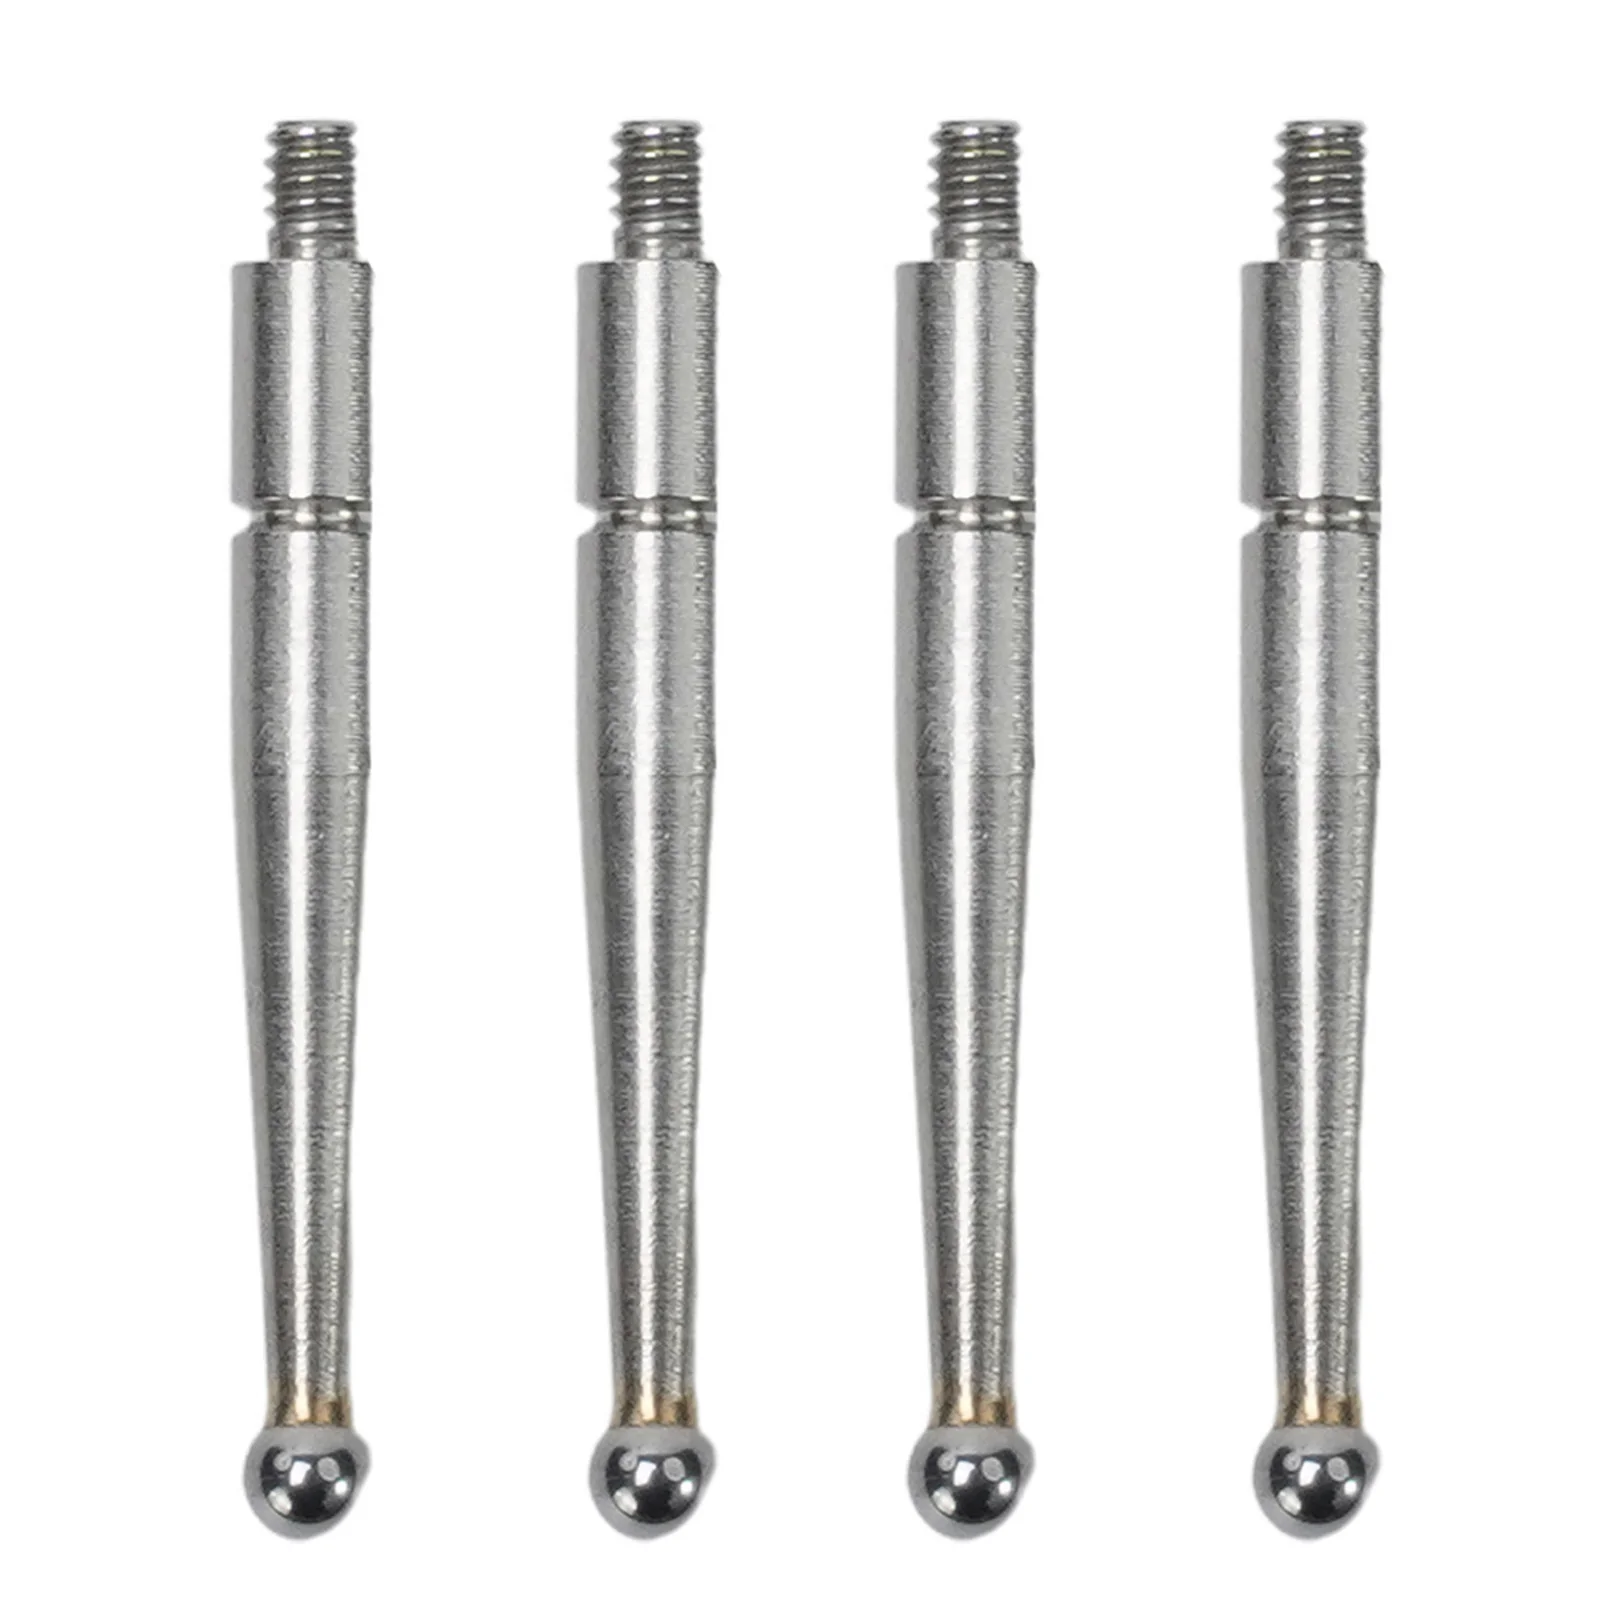 

4Pcs 103006 Contact Points 2mm Tungsten Carbide Ball M1.6 Thread Shank 20.9mm Probe For Dial Test Indicator Testing Tool Parts